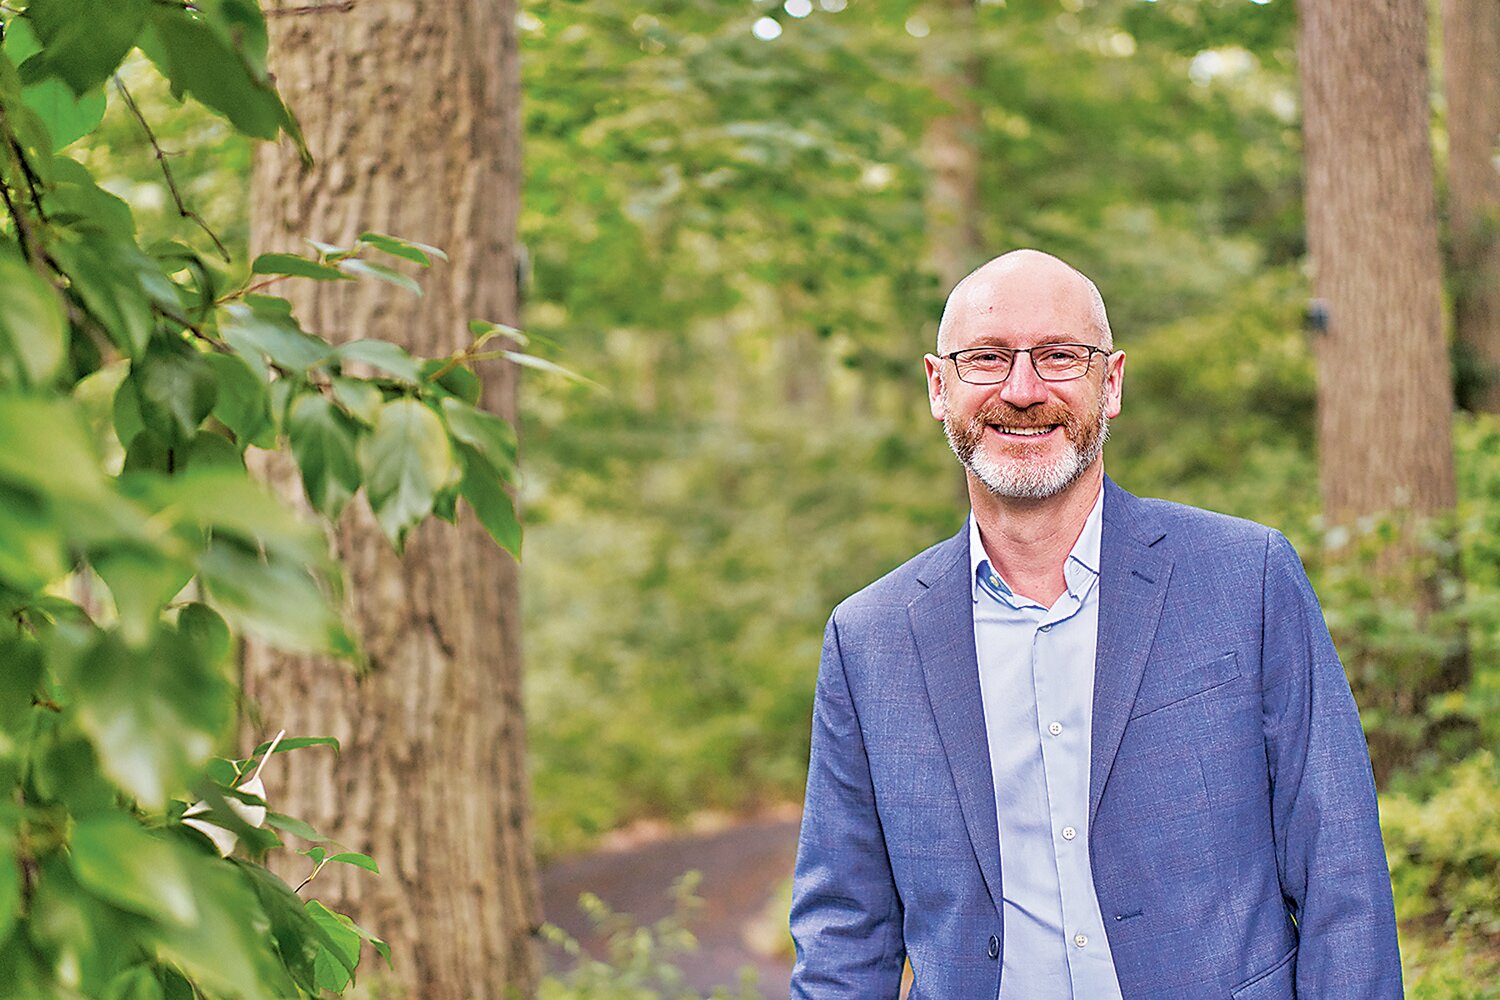 Tom Smarr, executive director of Jenkins Arboretum & Gardens, will present at Bucks County Community College’s 16th Tyler Formal Gardens & Landscaping Lecture.